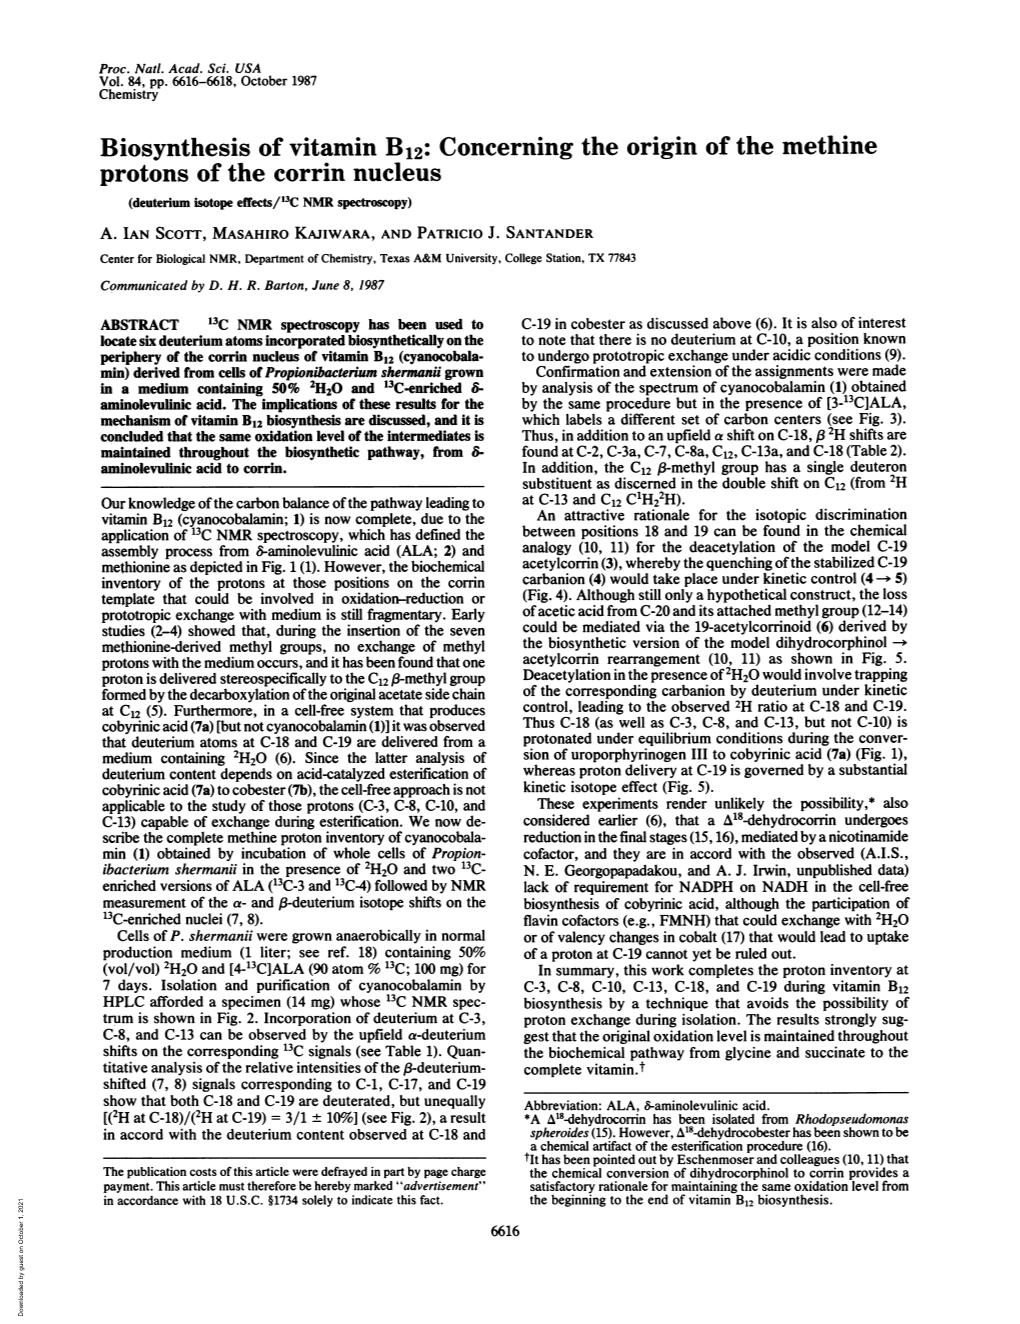 Biosynthesis of Vitamin B12: Concerning the Origin of the Methine Protons of the Corrin Nucleus (Deuterium Isotope Effects/'3C NMR Spectroscopy) A